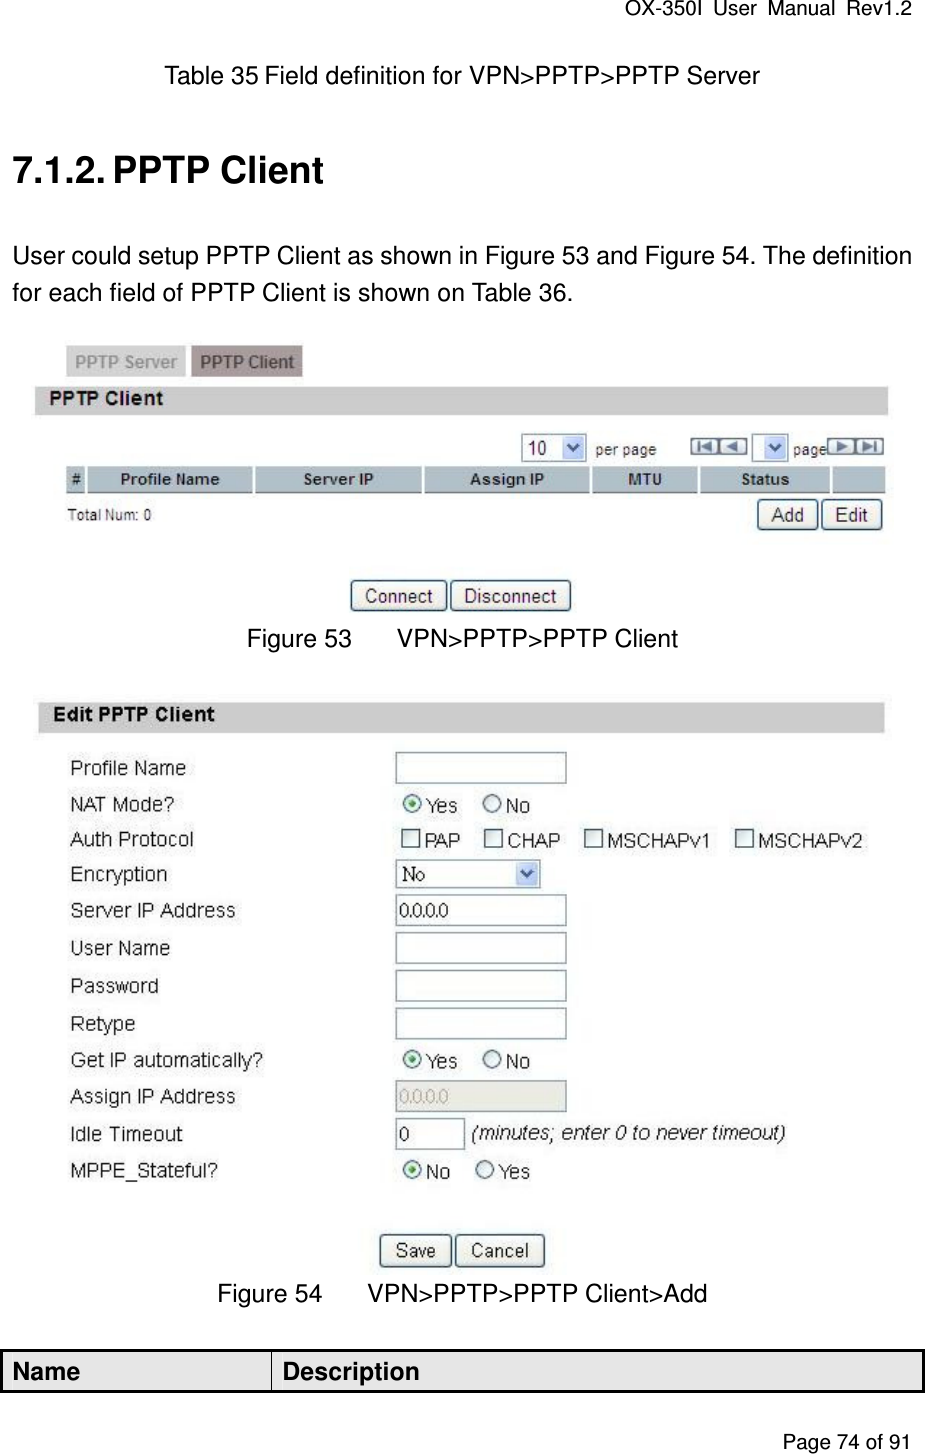 OX-350I  User  Manual  Rev1.2 Page 74 of 91 Table 35 Field definition for VPN&gt;PPTP&gt;PPTP Server 7.1.2. PPTP Client User could setup PPTP Client as shown in Figure 53 and Figure 54. The definition for each field of PPTP Client is shown on Table 36.  Figure 53  VPN&gt;PPTP&gt;PPTP Client  Figure 54  VPN&gt;PPTP&gt;PPTP Client&gt;Add Name  Description 